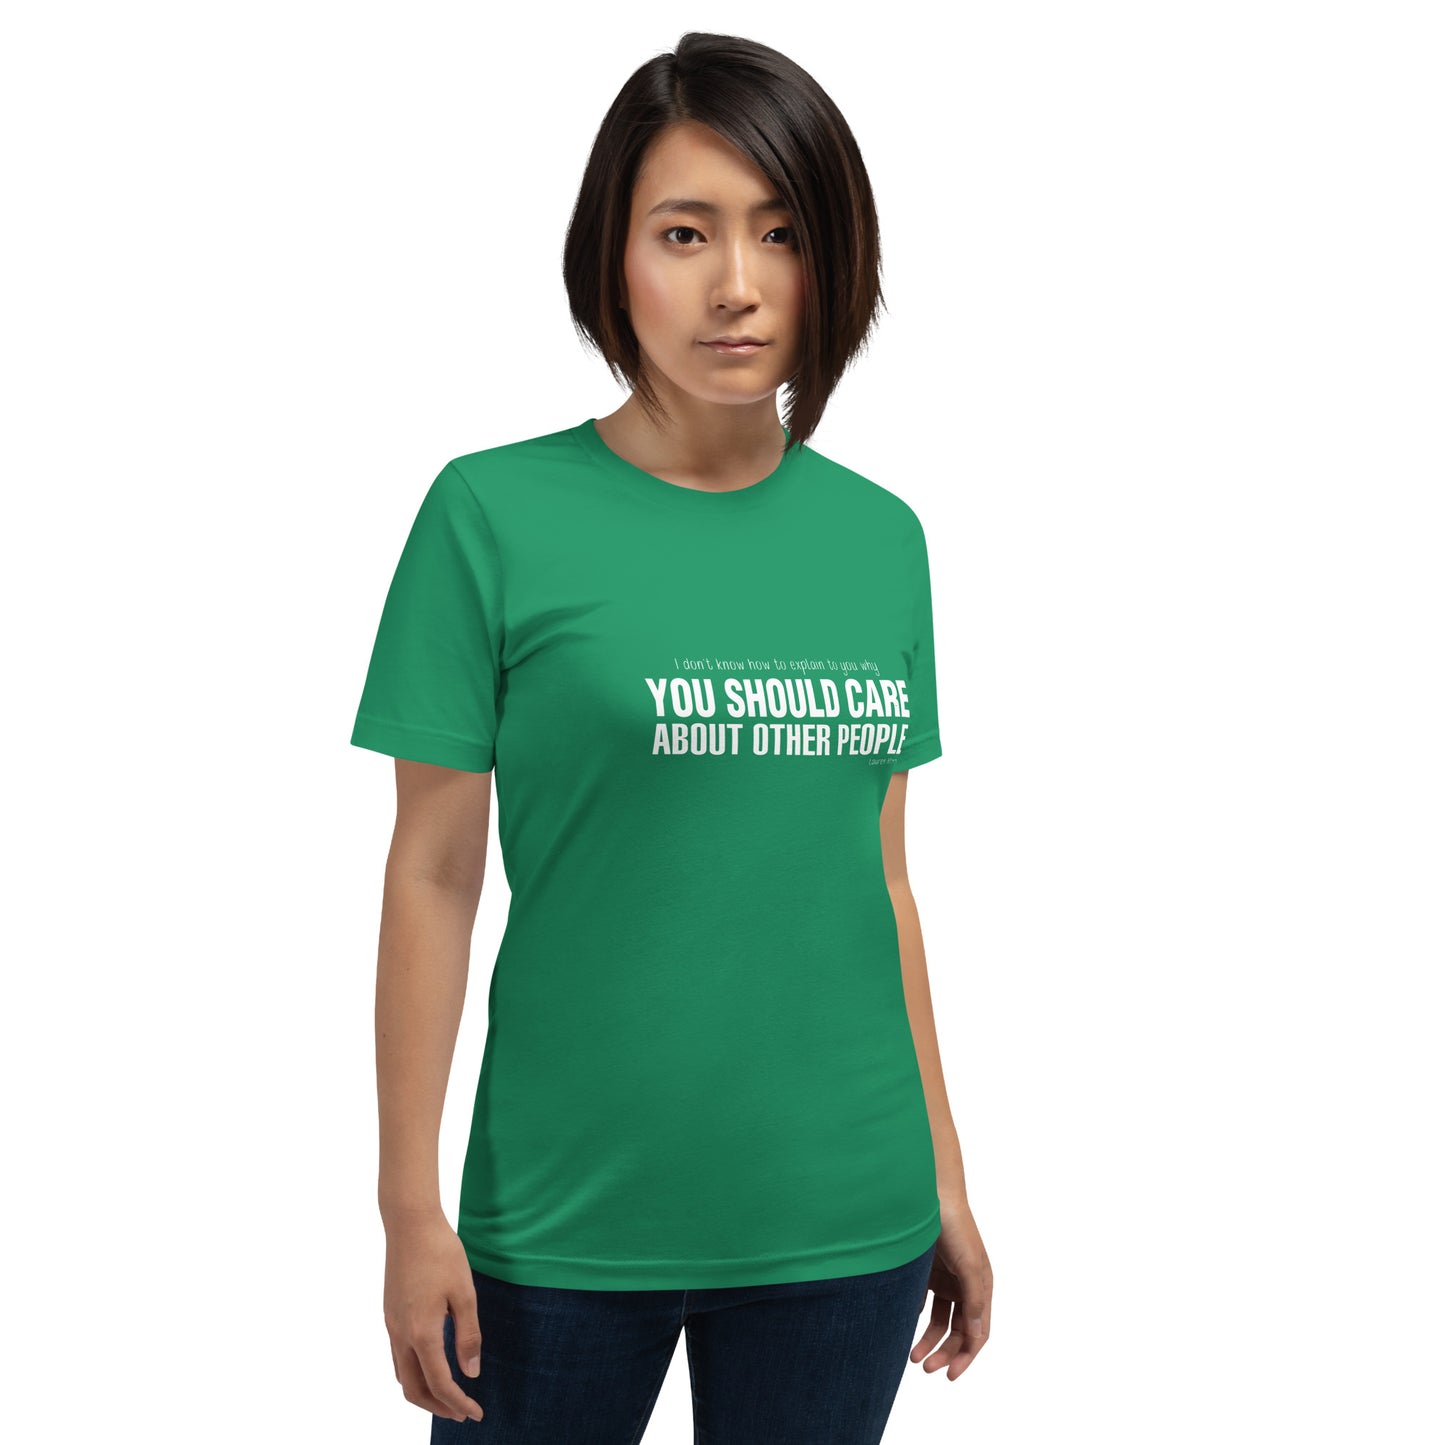 Model wearing Kelly green t-shirt with quote by Lauren Morrill: "I don't know how to explain to you why YOU SHOULD CARE ABOUT OTHER PEOPLE"